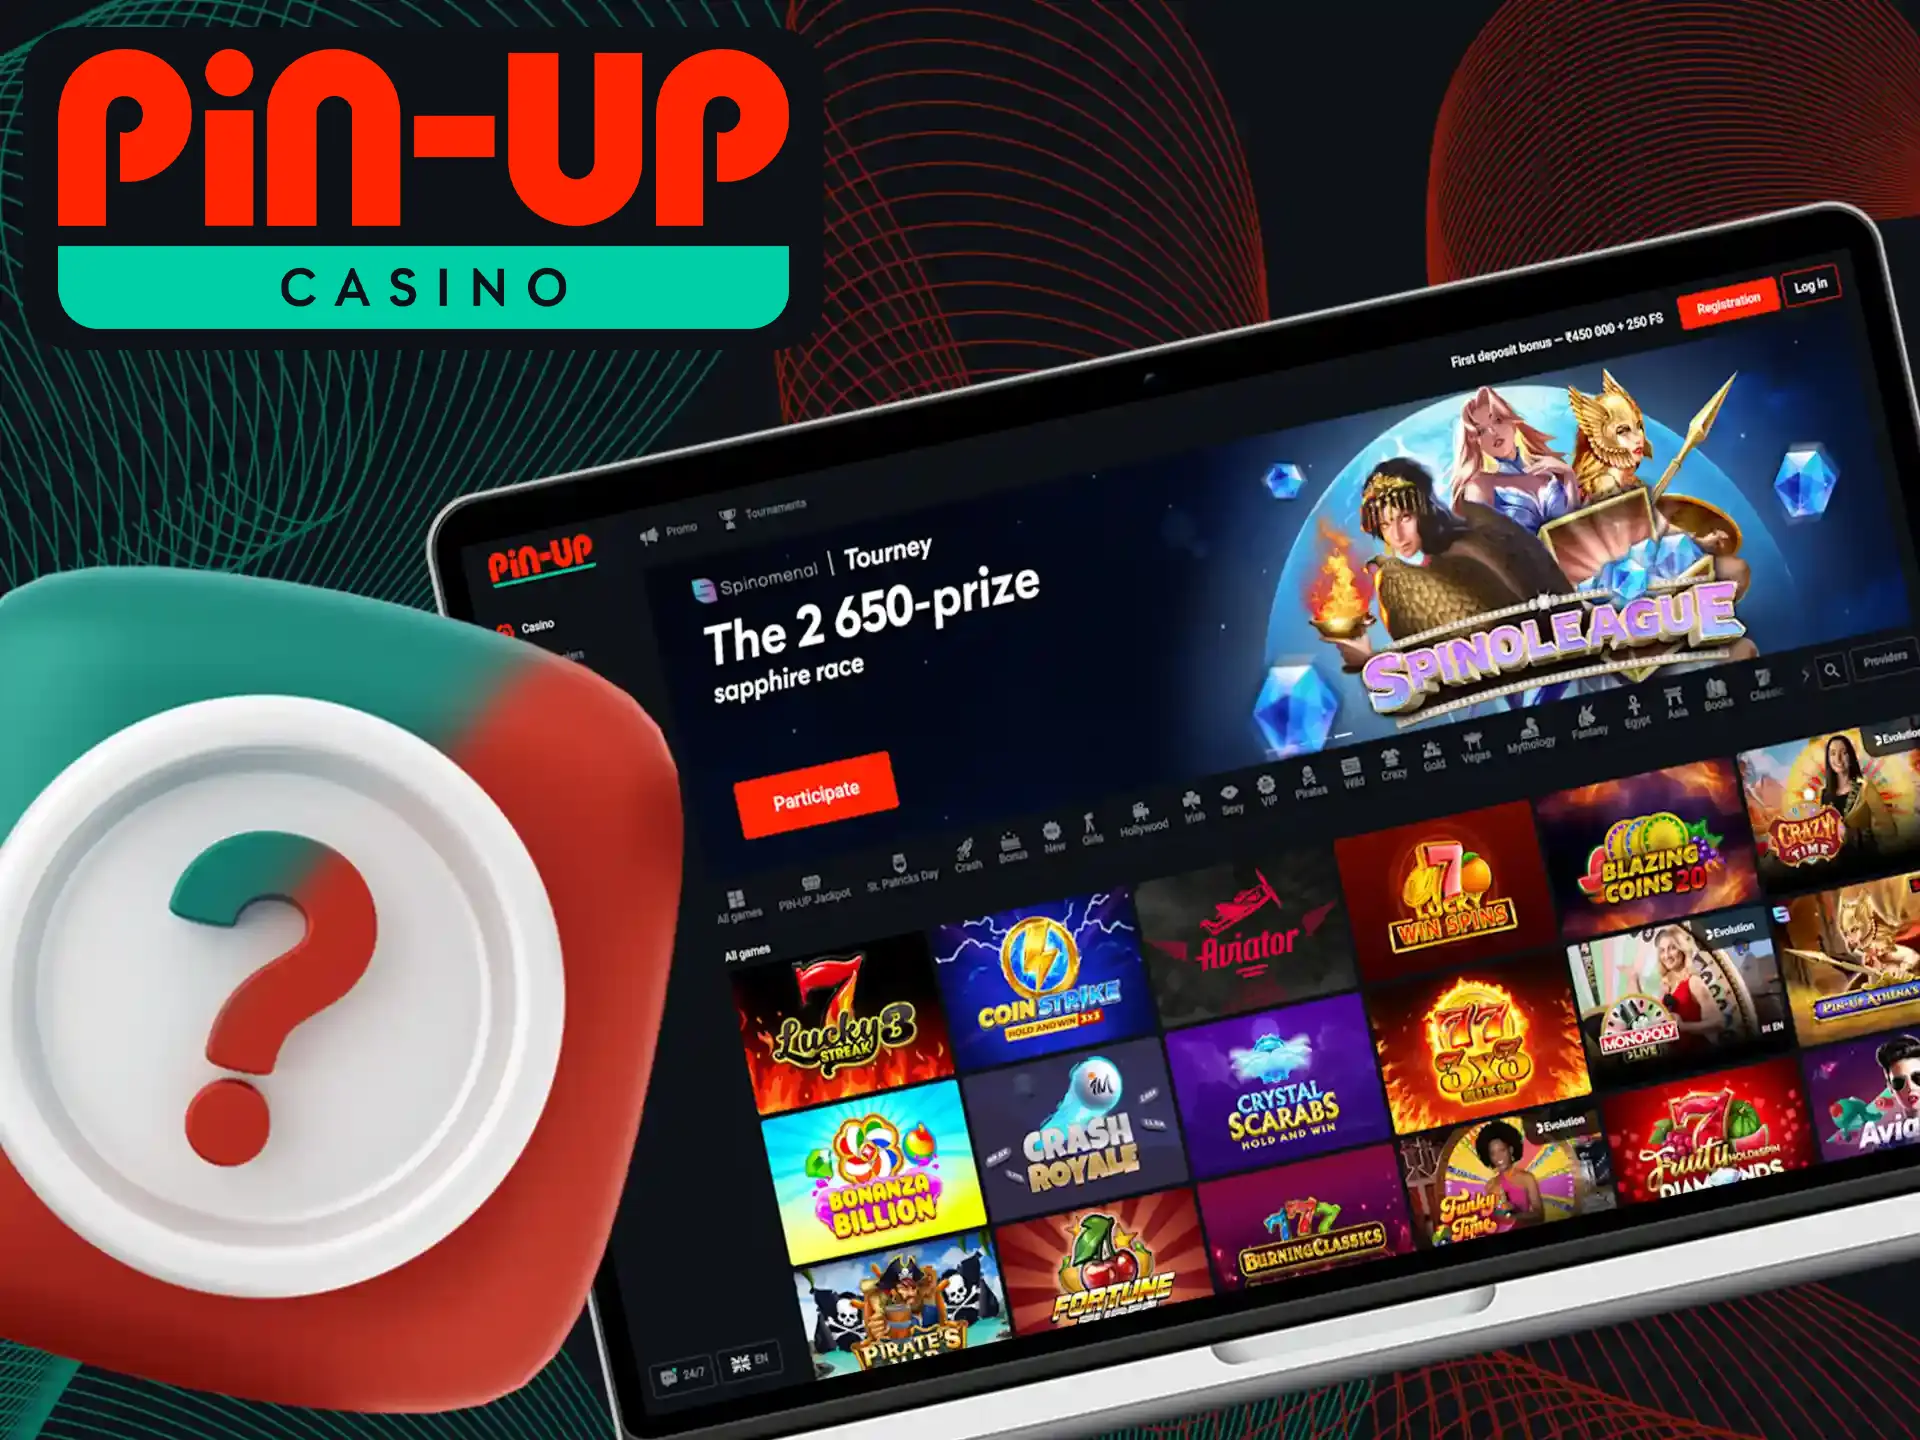 To start playing at Pin-Up Casino you need to register and fill in your account details.